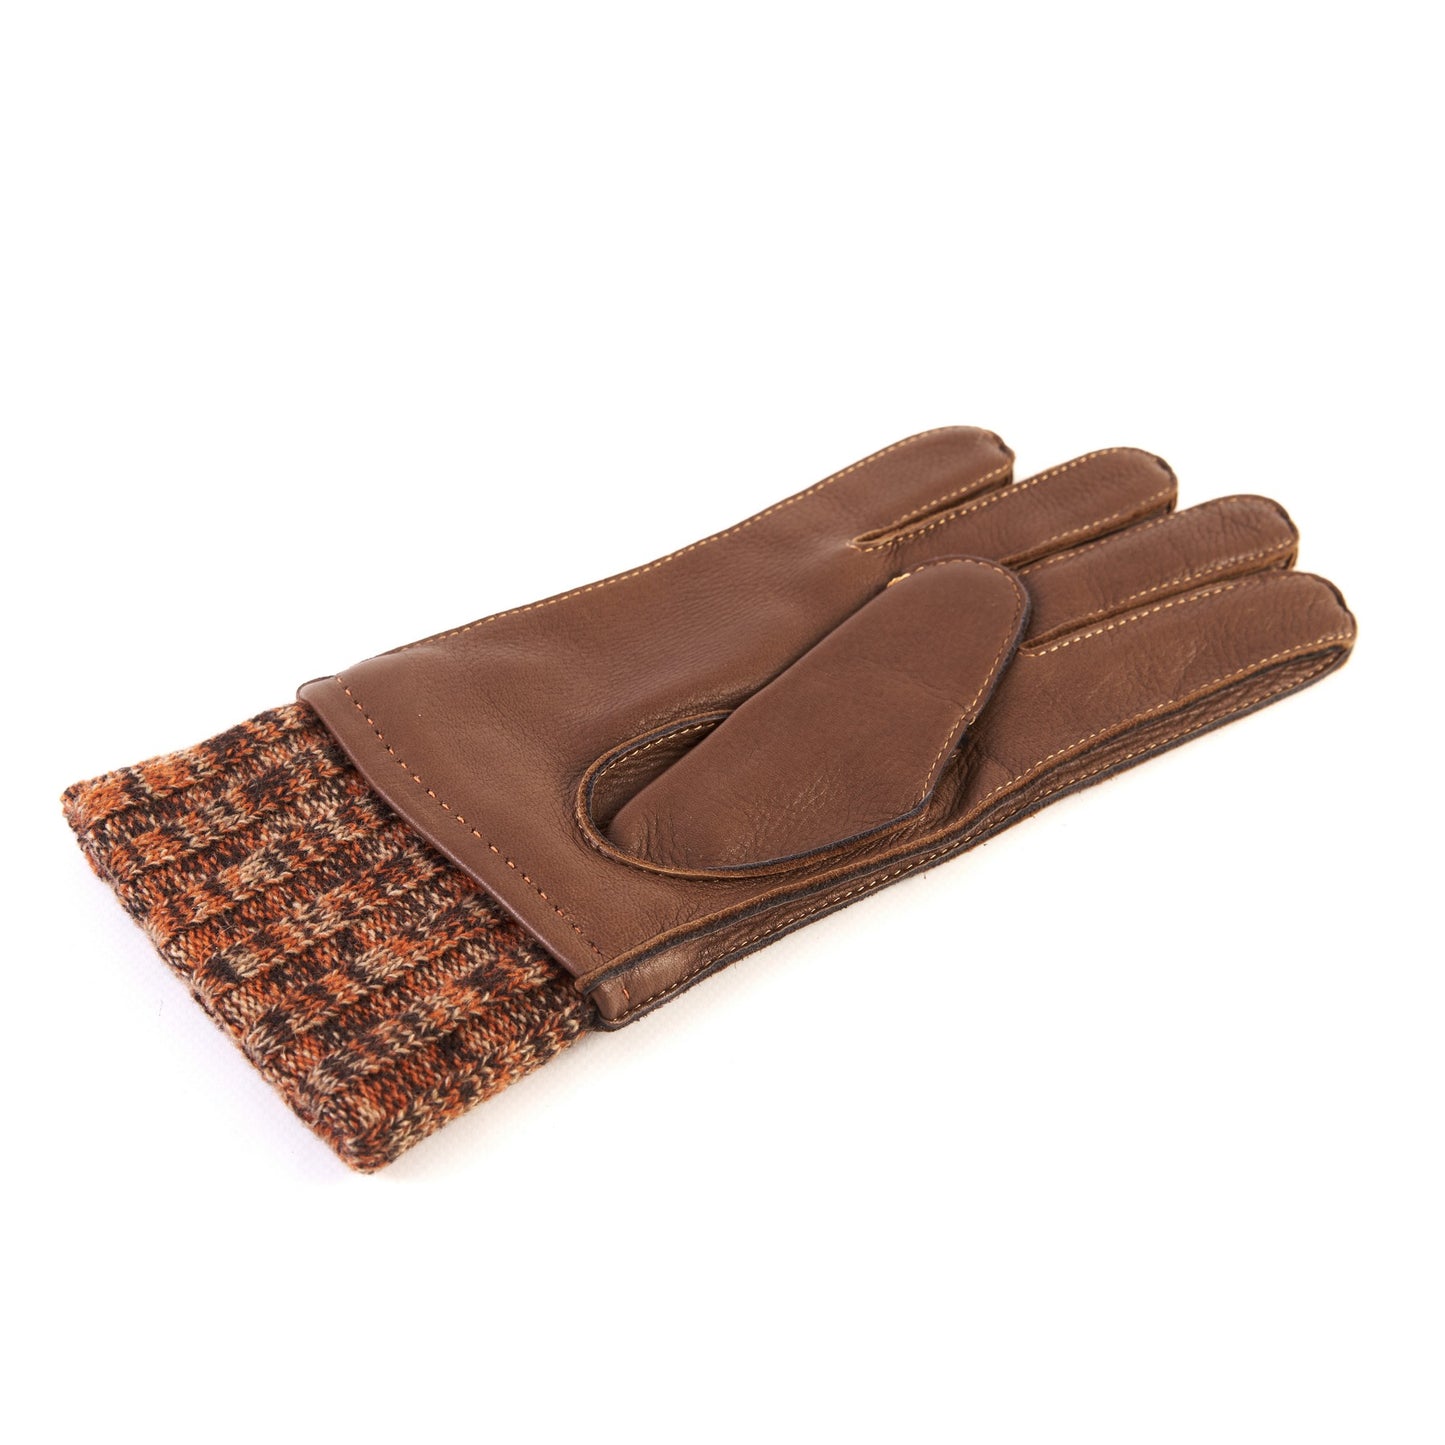 Men's light brown deerskin gloves with wool lining with cuff